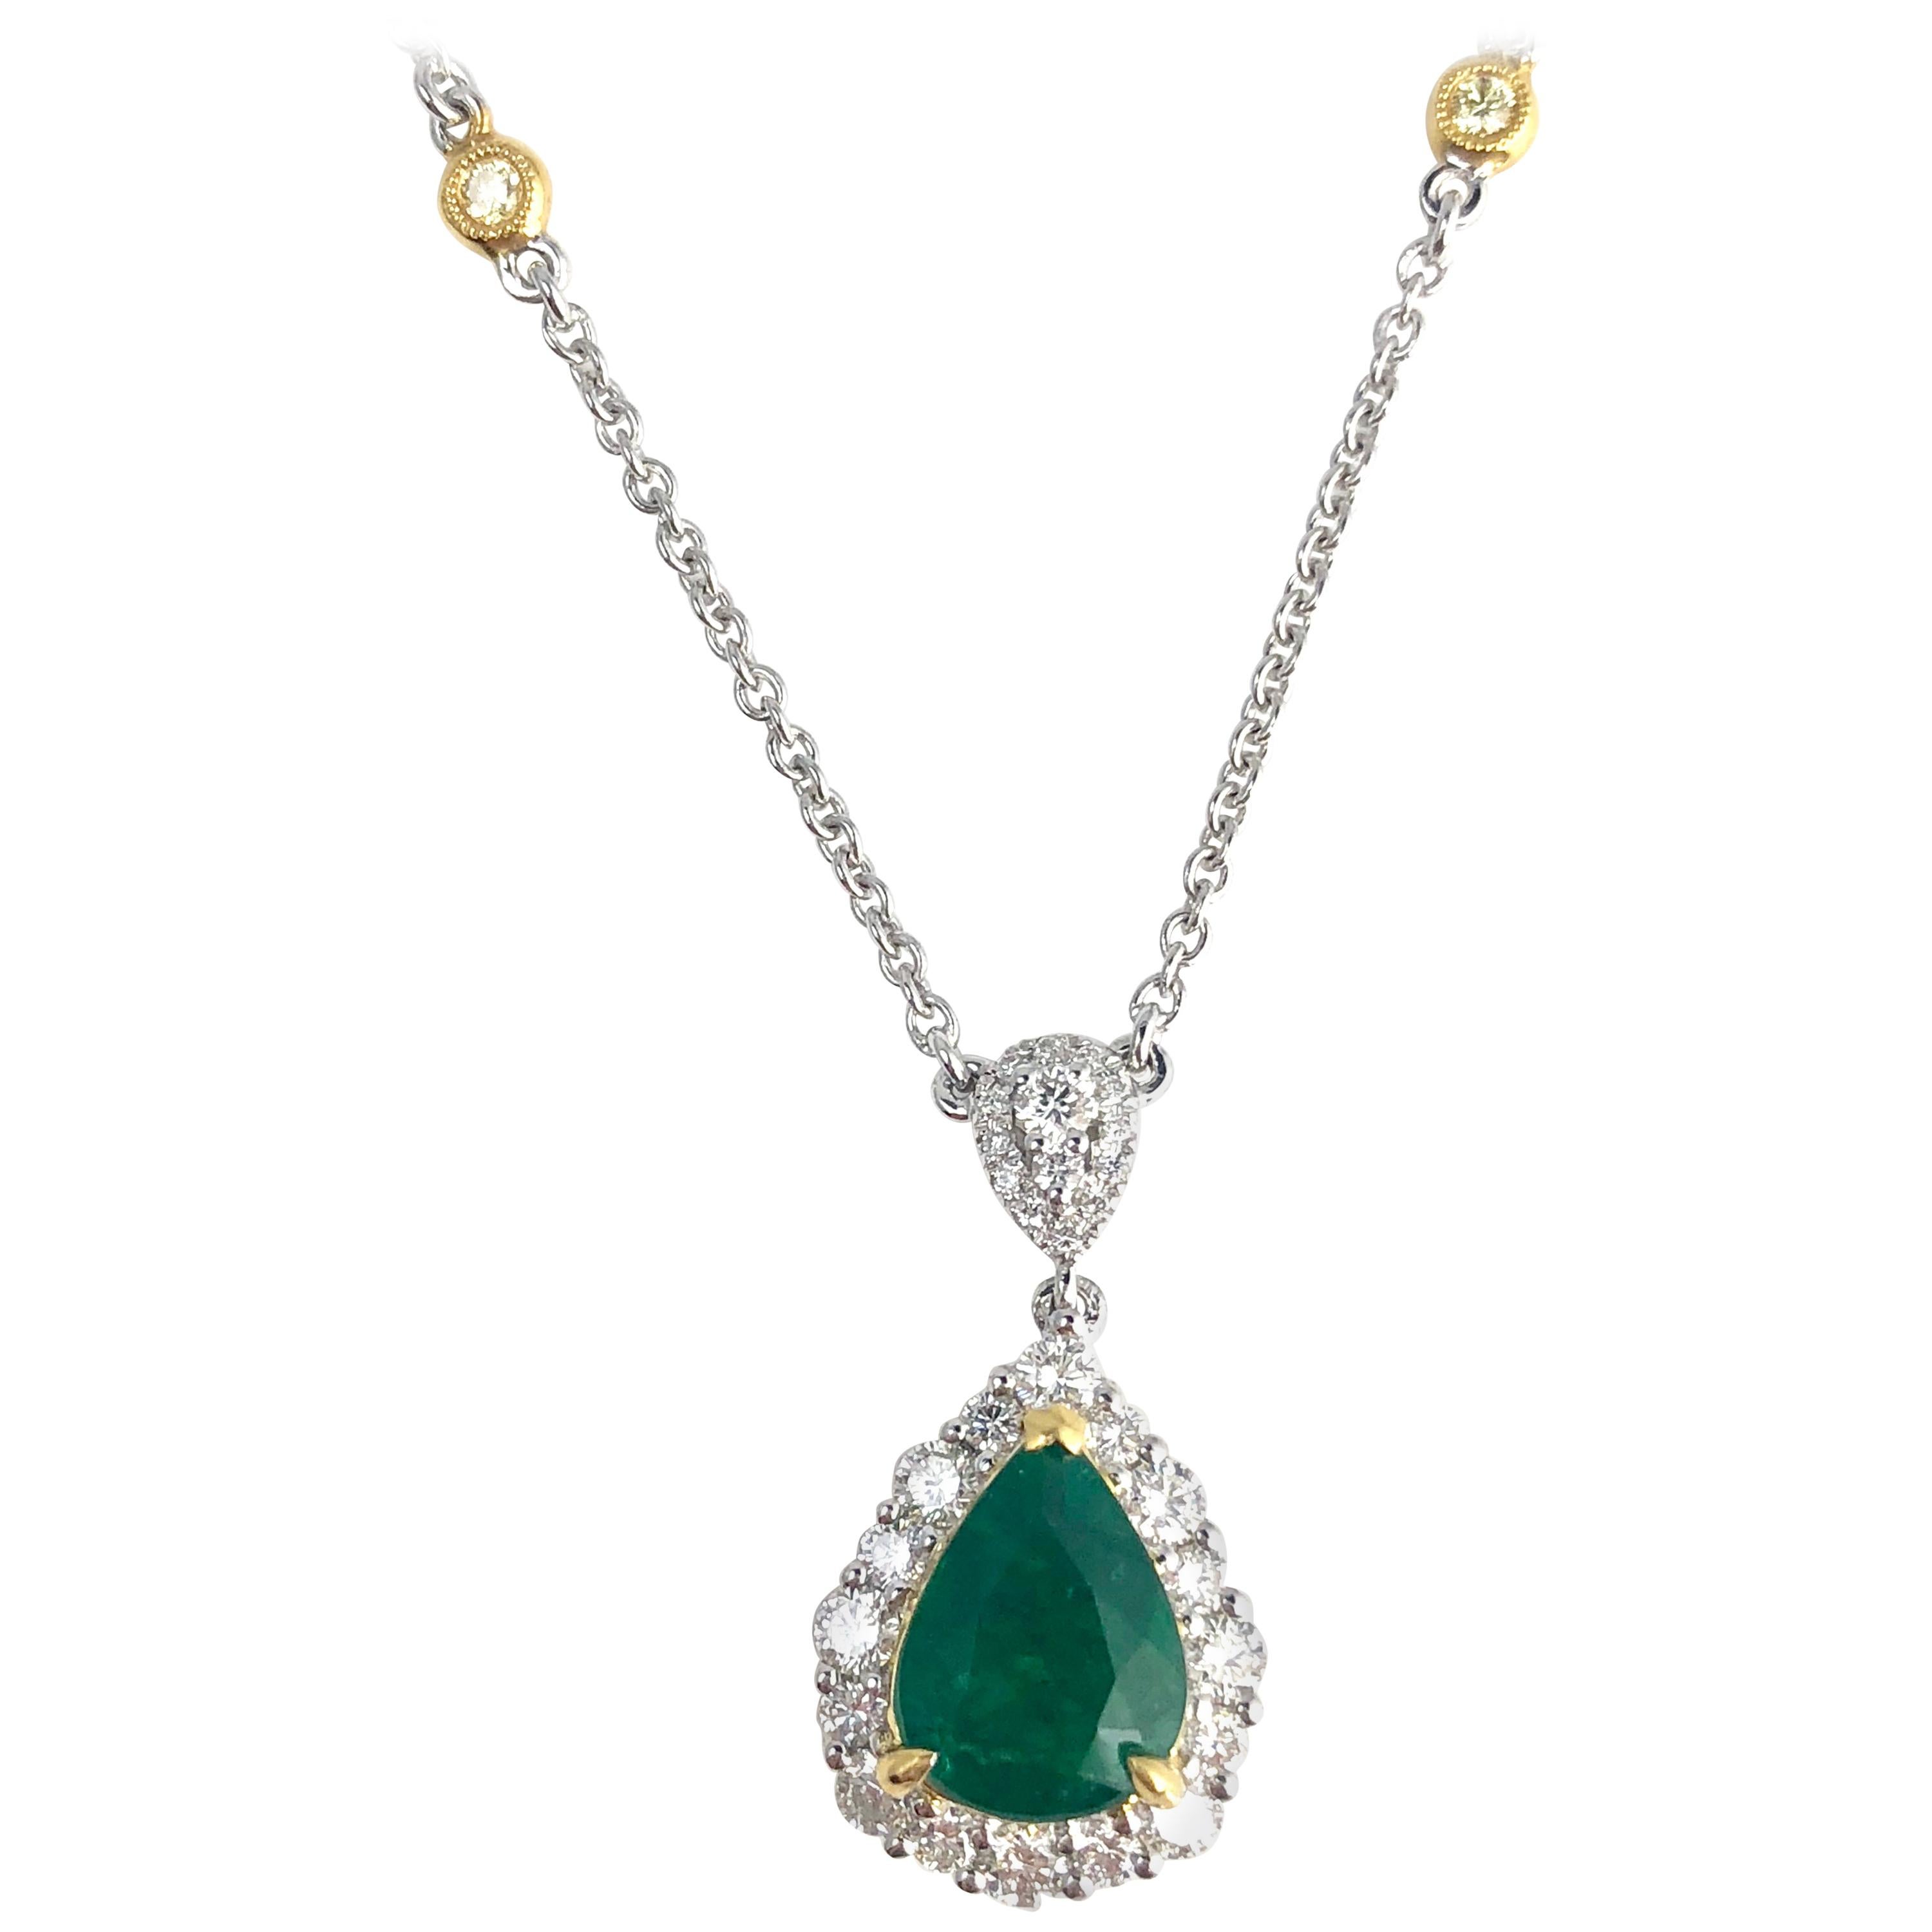 2.10 Carat Pear Shape Fine Emerald and Diamond Pendant in White and Yellow Gold